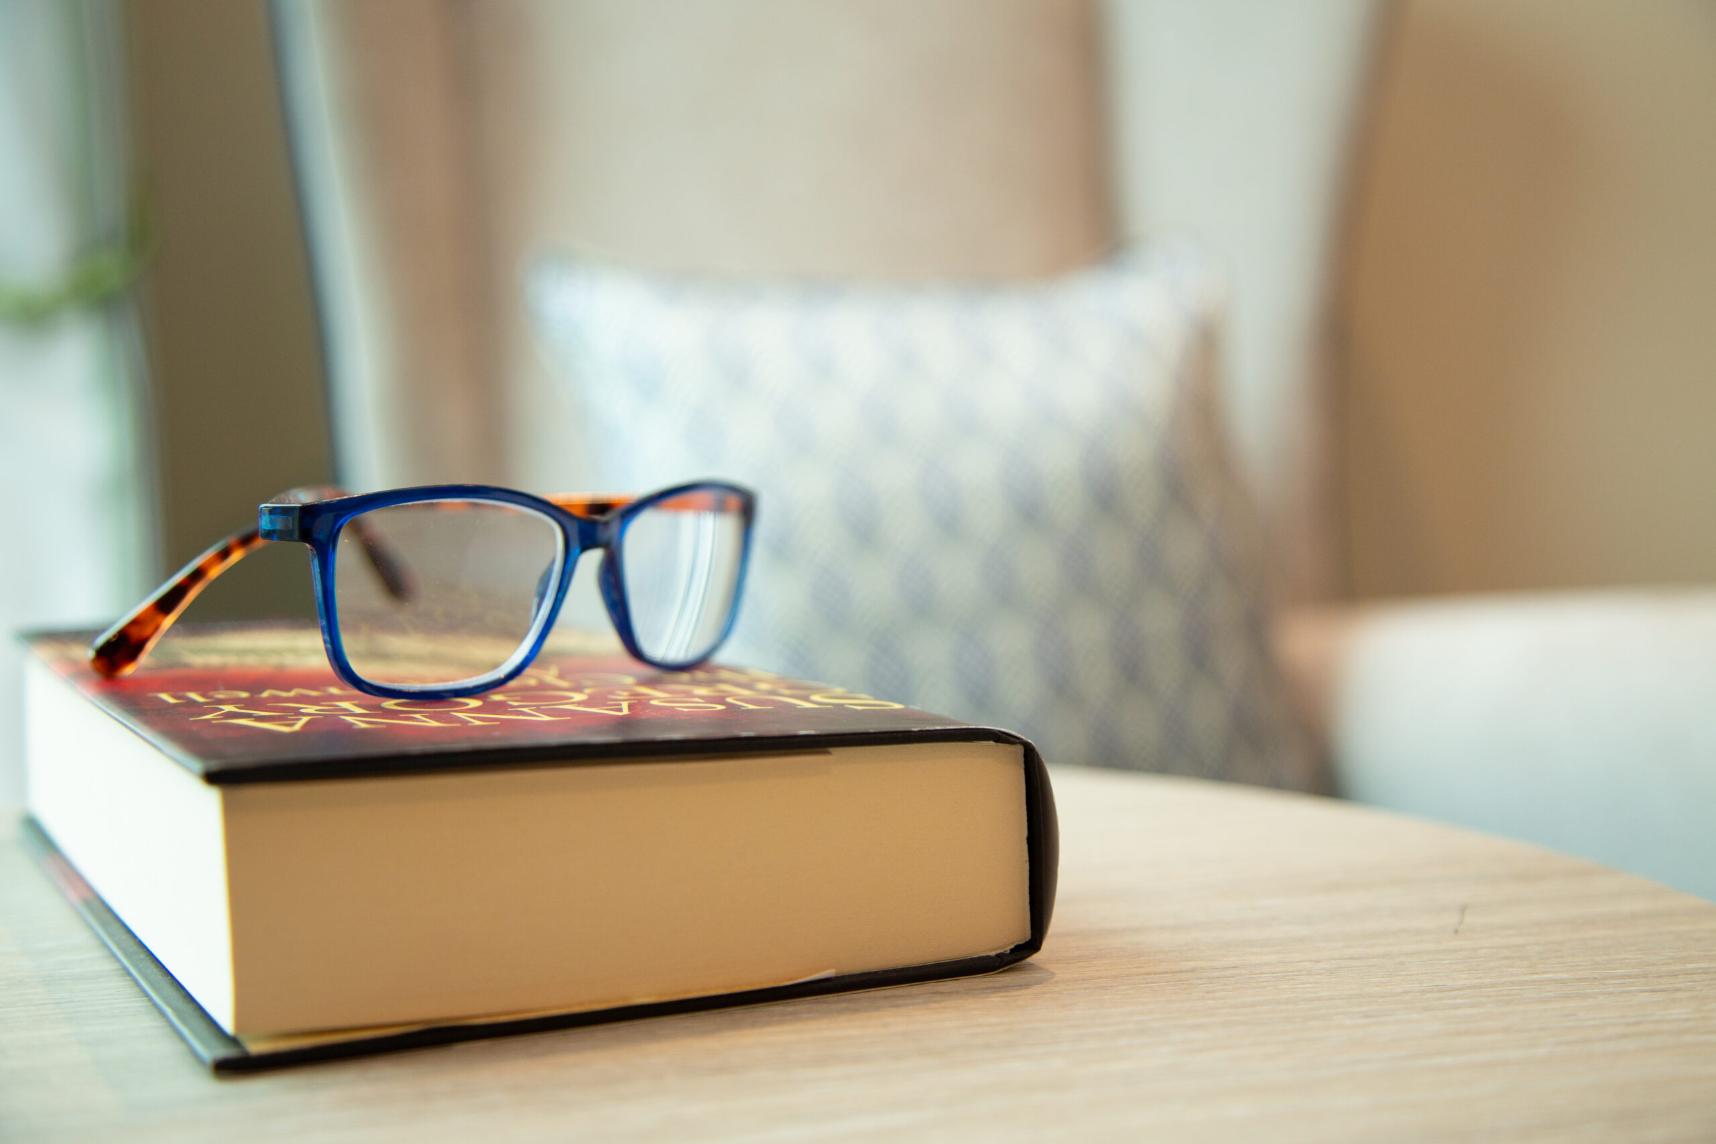 glasses on top of a book on a side table